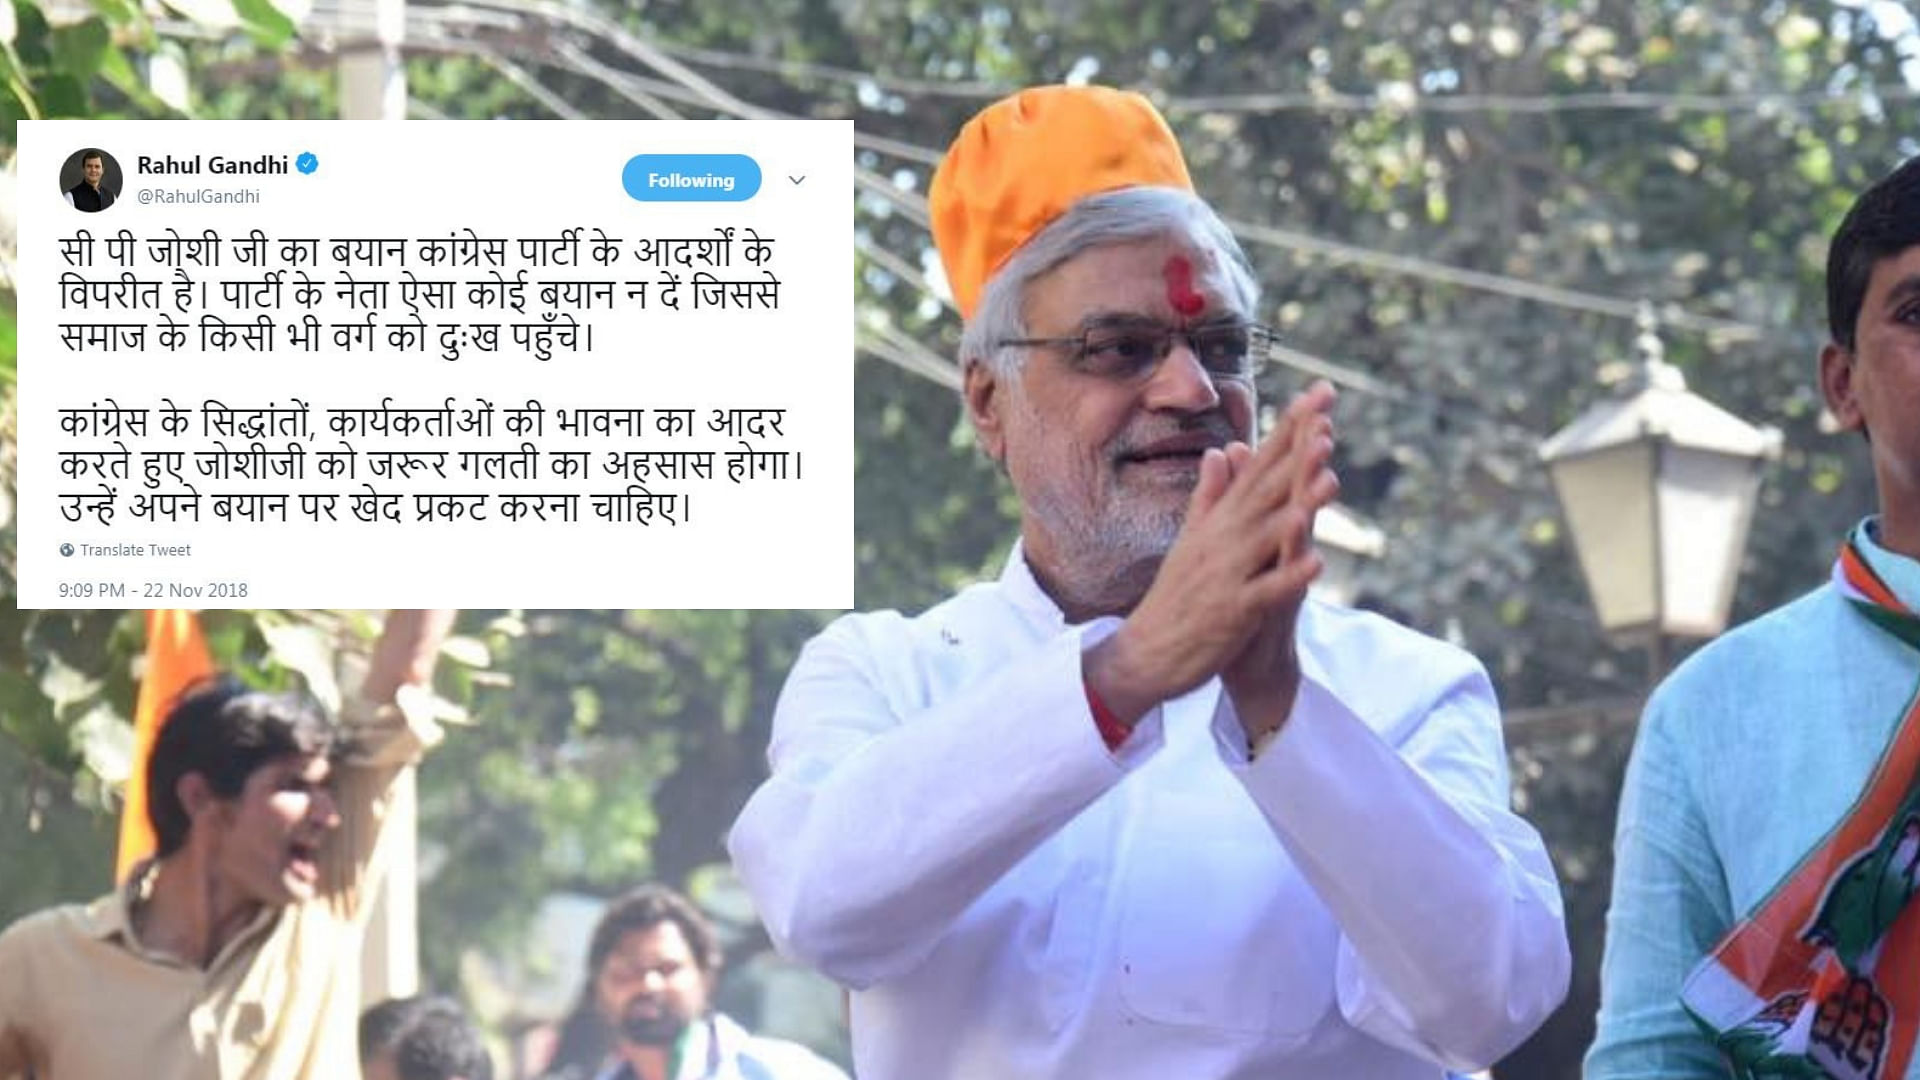  CP Joshi  apologises for his casteist remarks after party chief Rahul Gandhi disapproved of his comments.